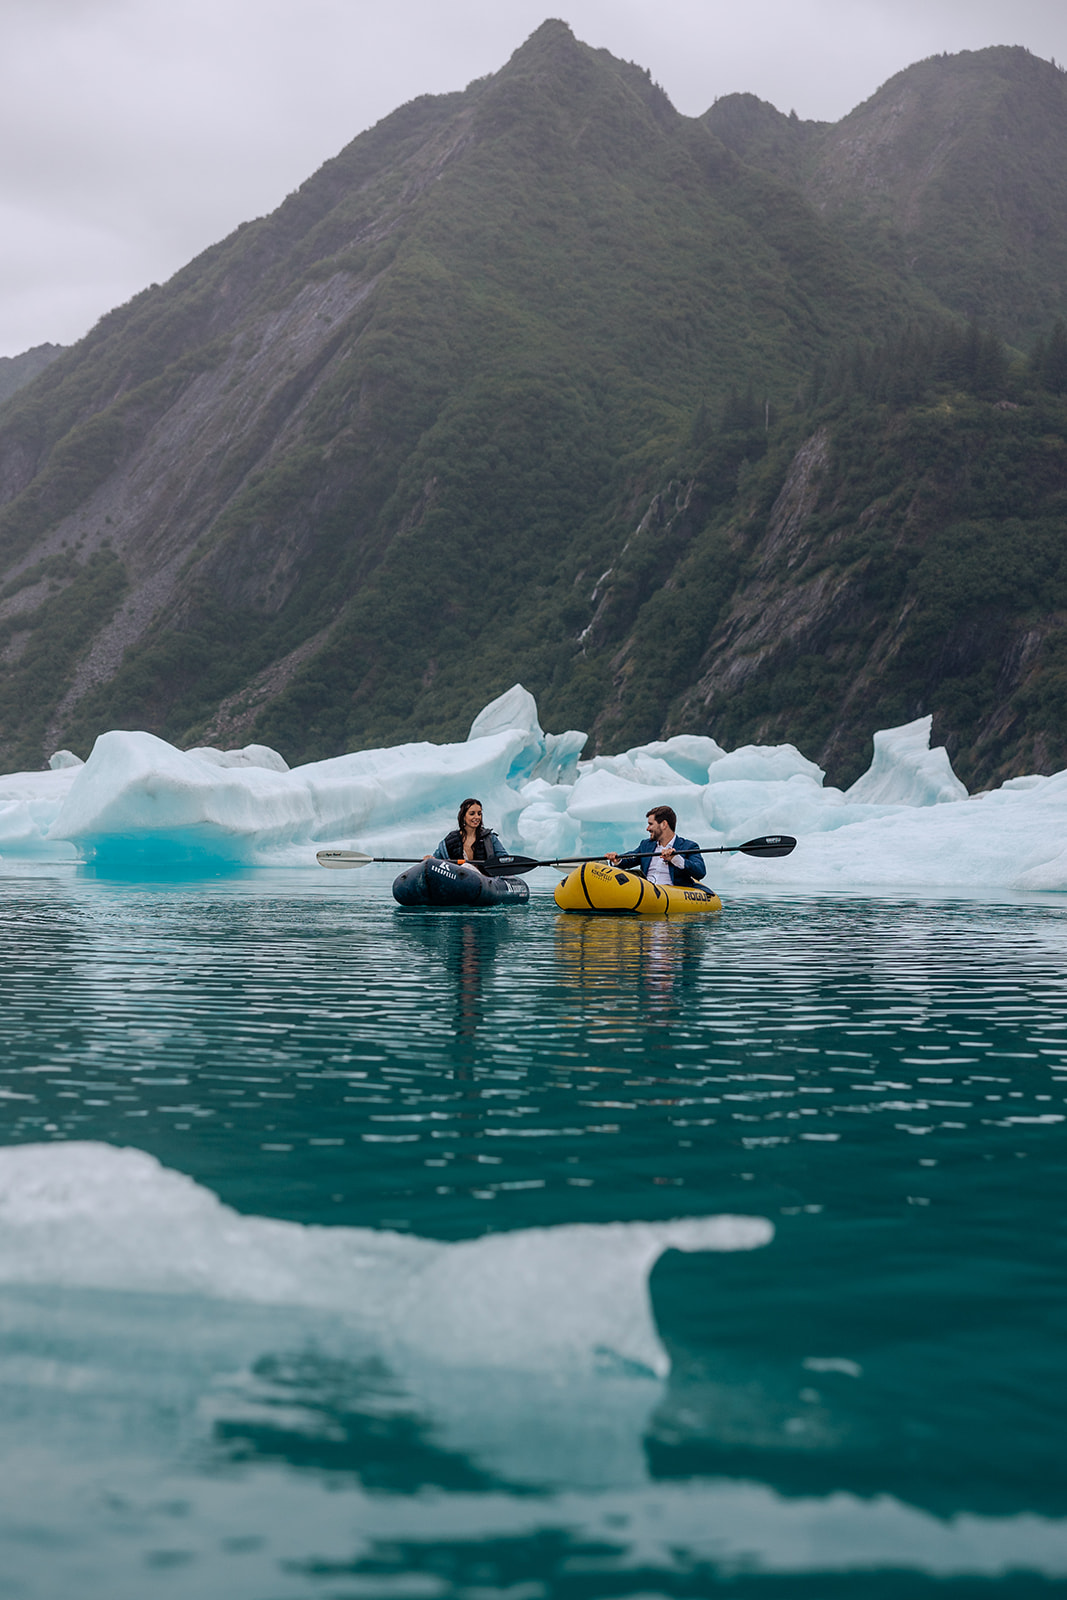 bride and groom with icebergs in alaska